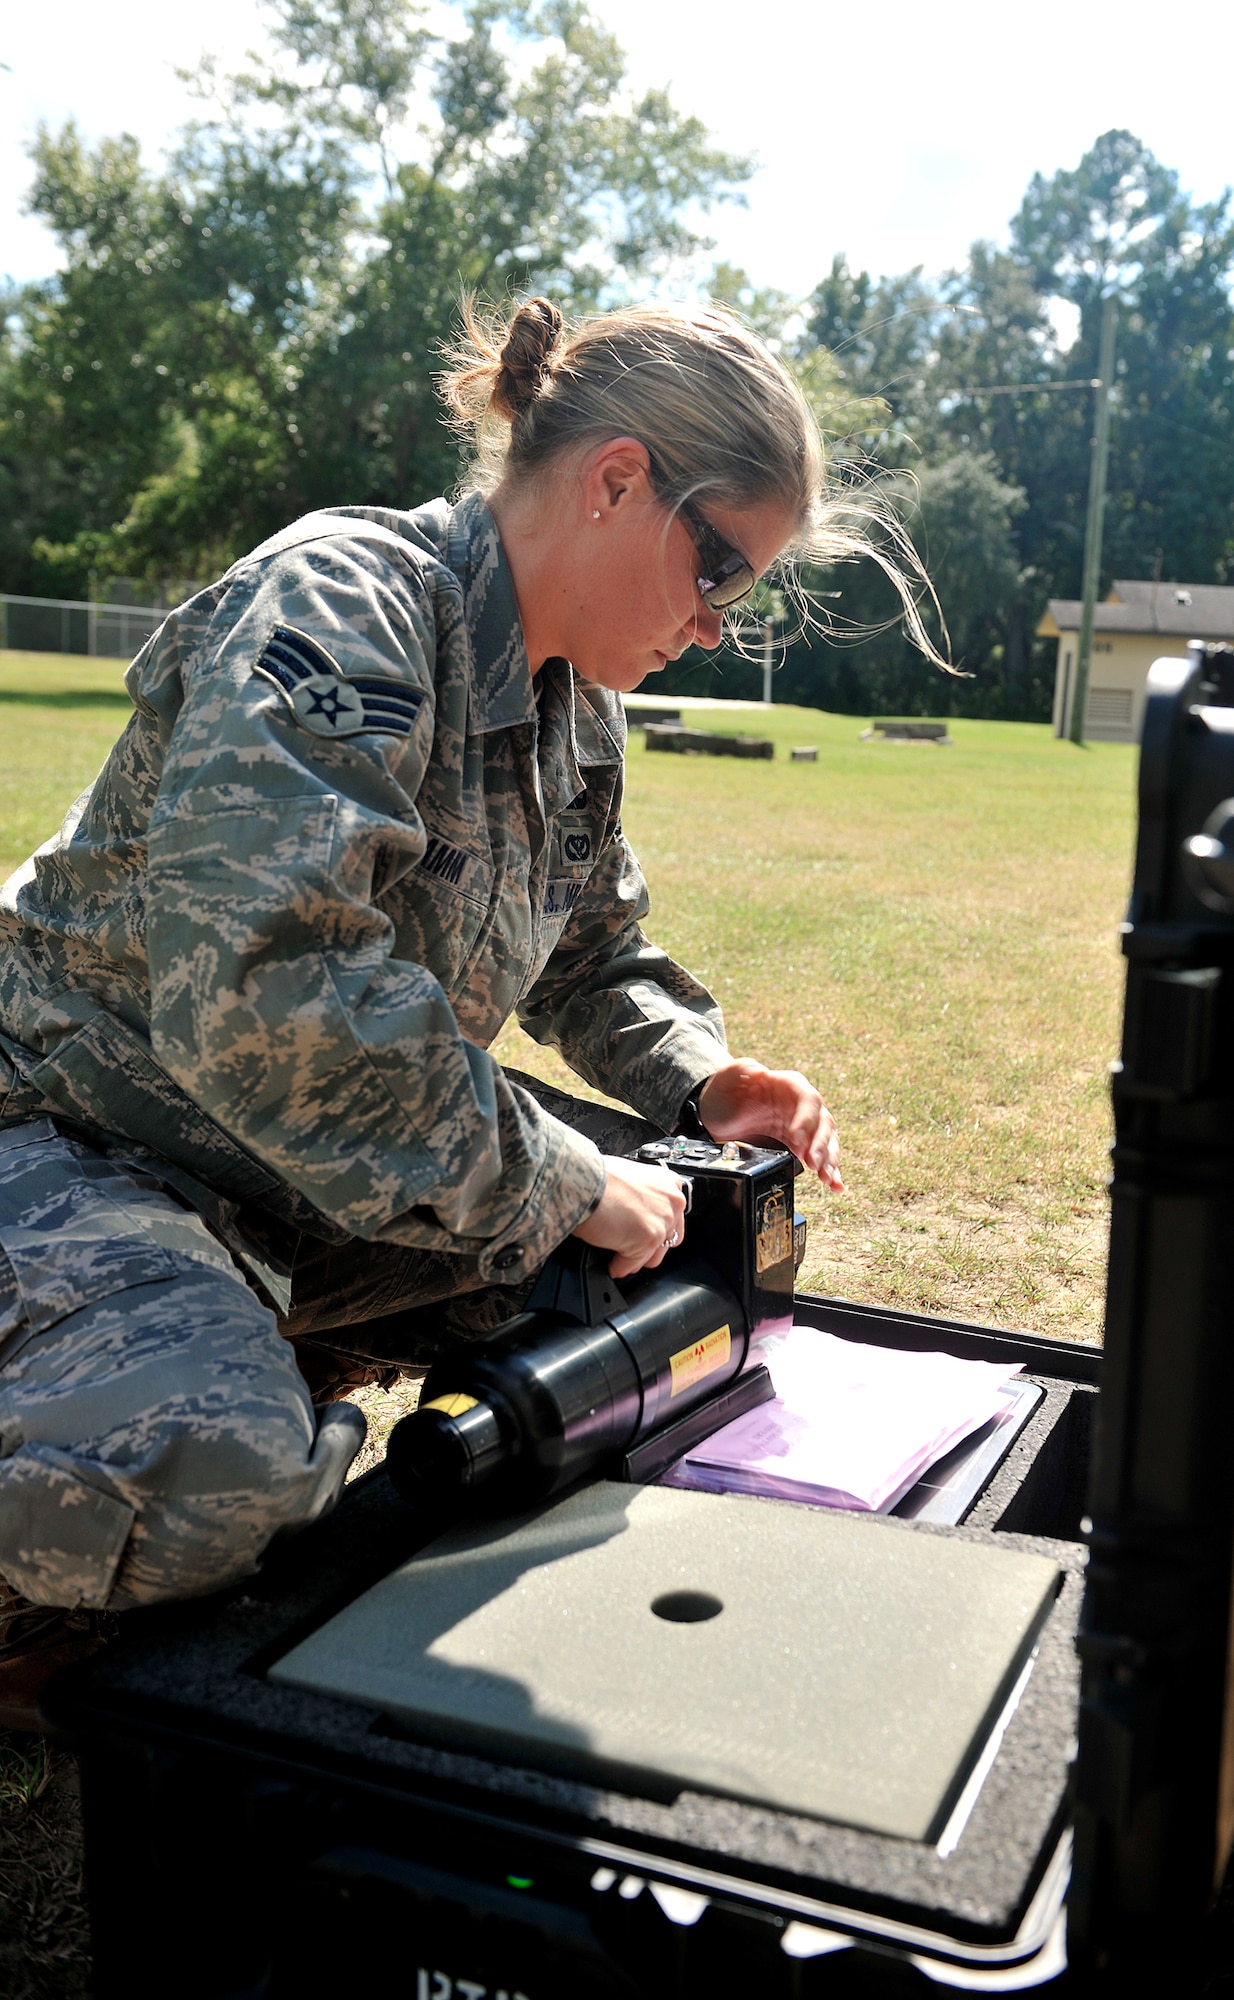 Senior Airman Katie Hamm prepares equipment during a hostage training exercise Oct. 13, 2010, at Moody Air Force Base, Ga. Airmen from the 23rd Civil Engineer Explosive Ordnance Disposal Flight tested the ability of their new Bomb Squad Emergency Response Vehicle during the exercise. Airman Hamm is an EOD technician assigned to the 23rd CE EOD Flight. (U.S. Air Force photo/Airman 1st Class Joshua Green) 